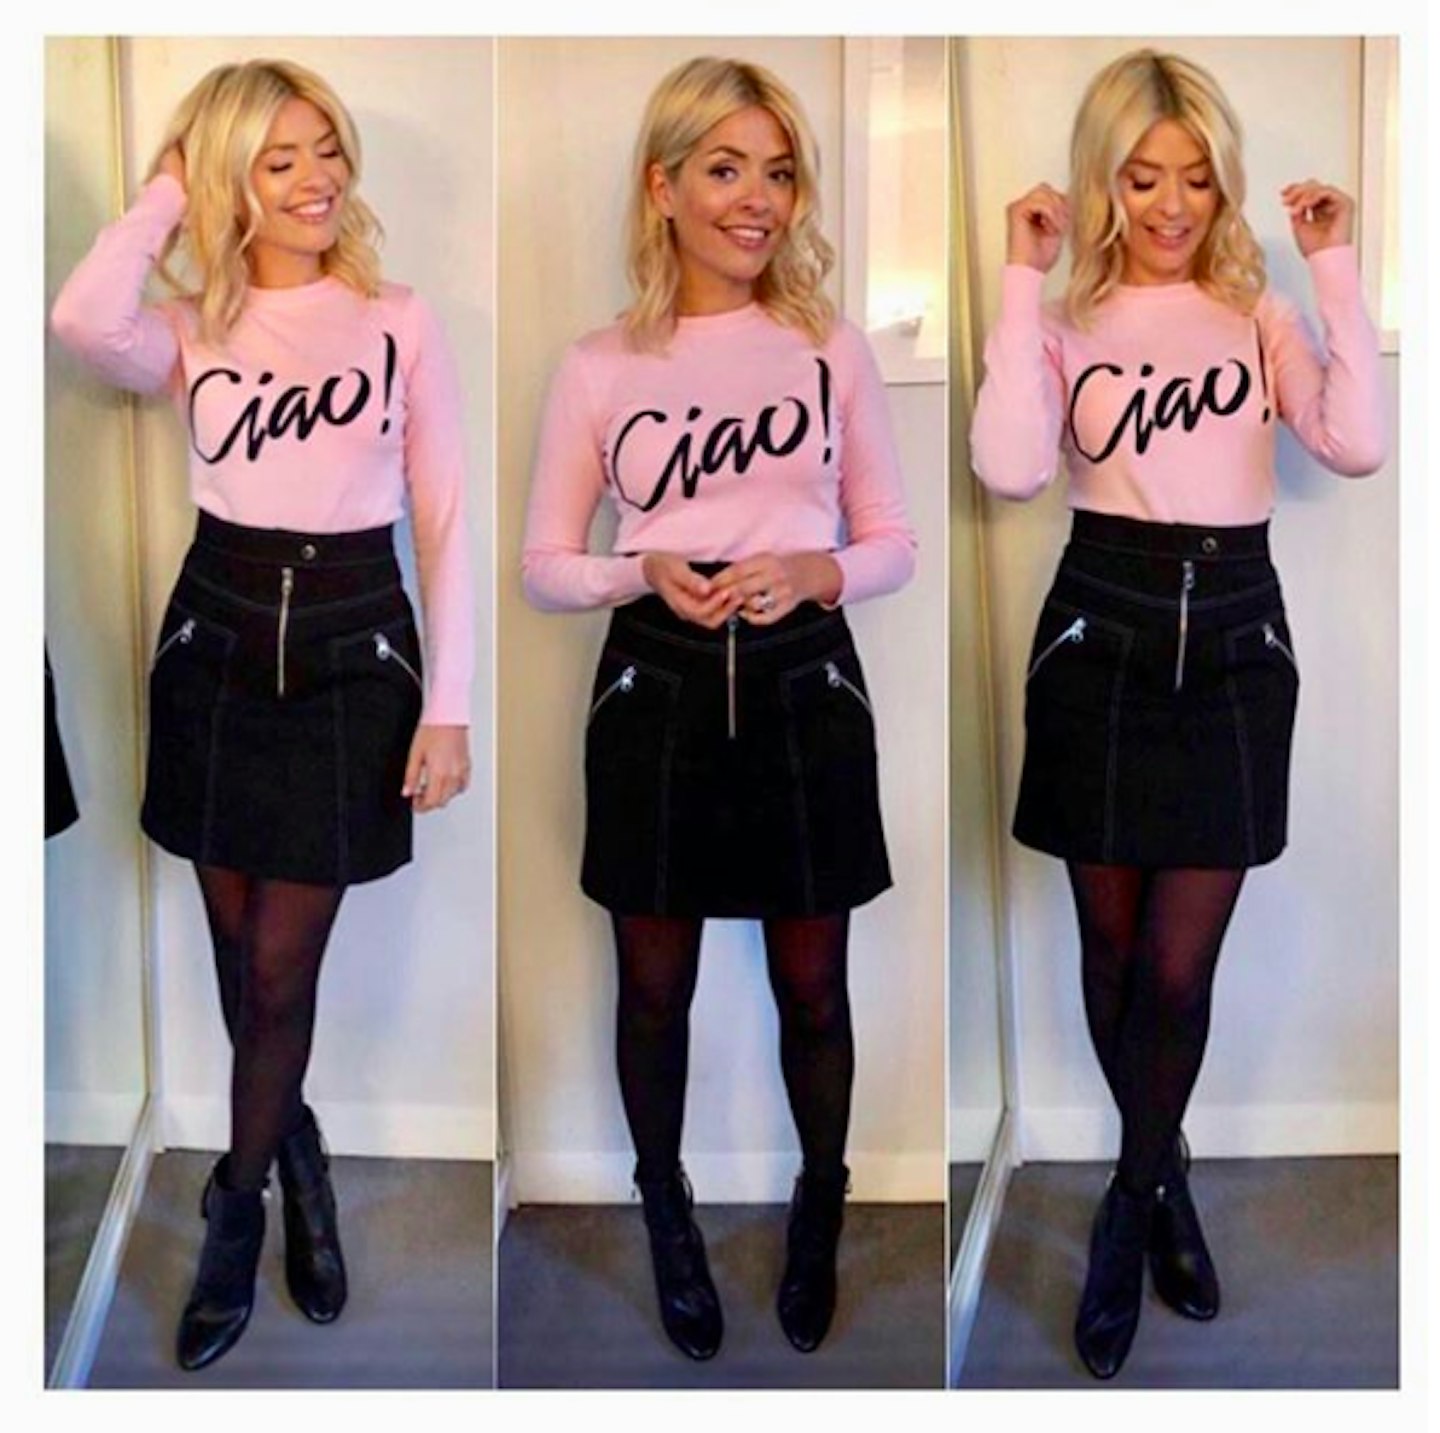 holly willoughby fashion